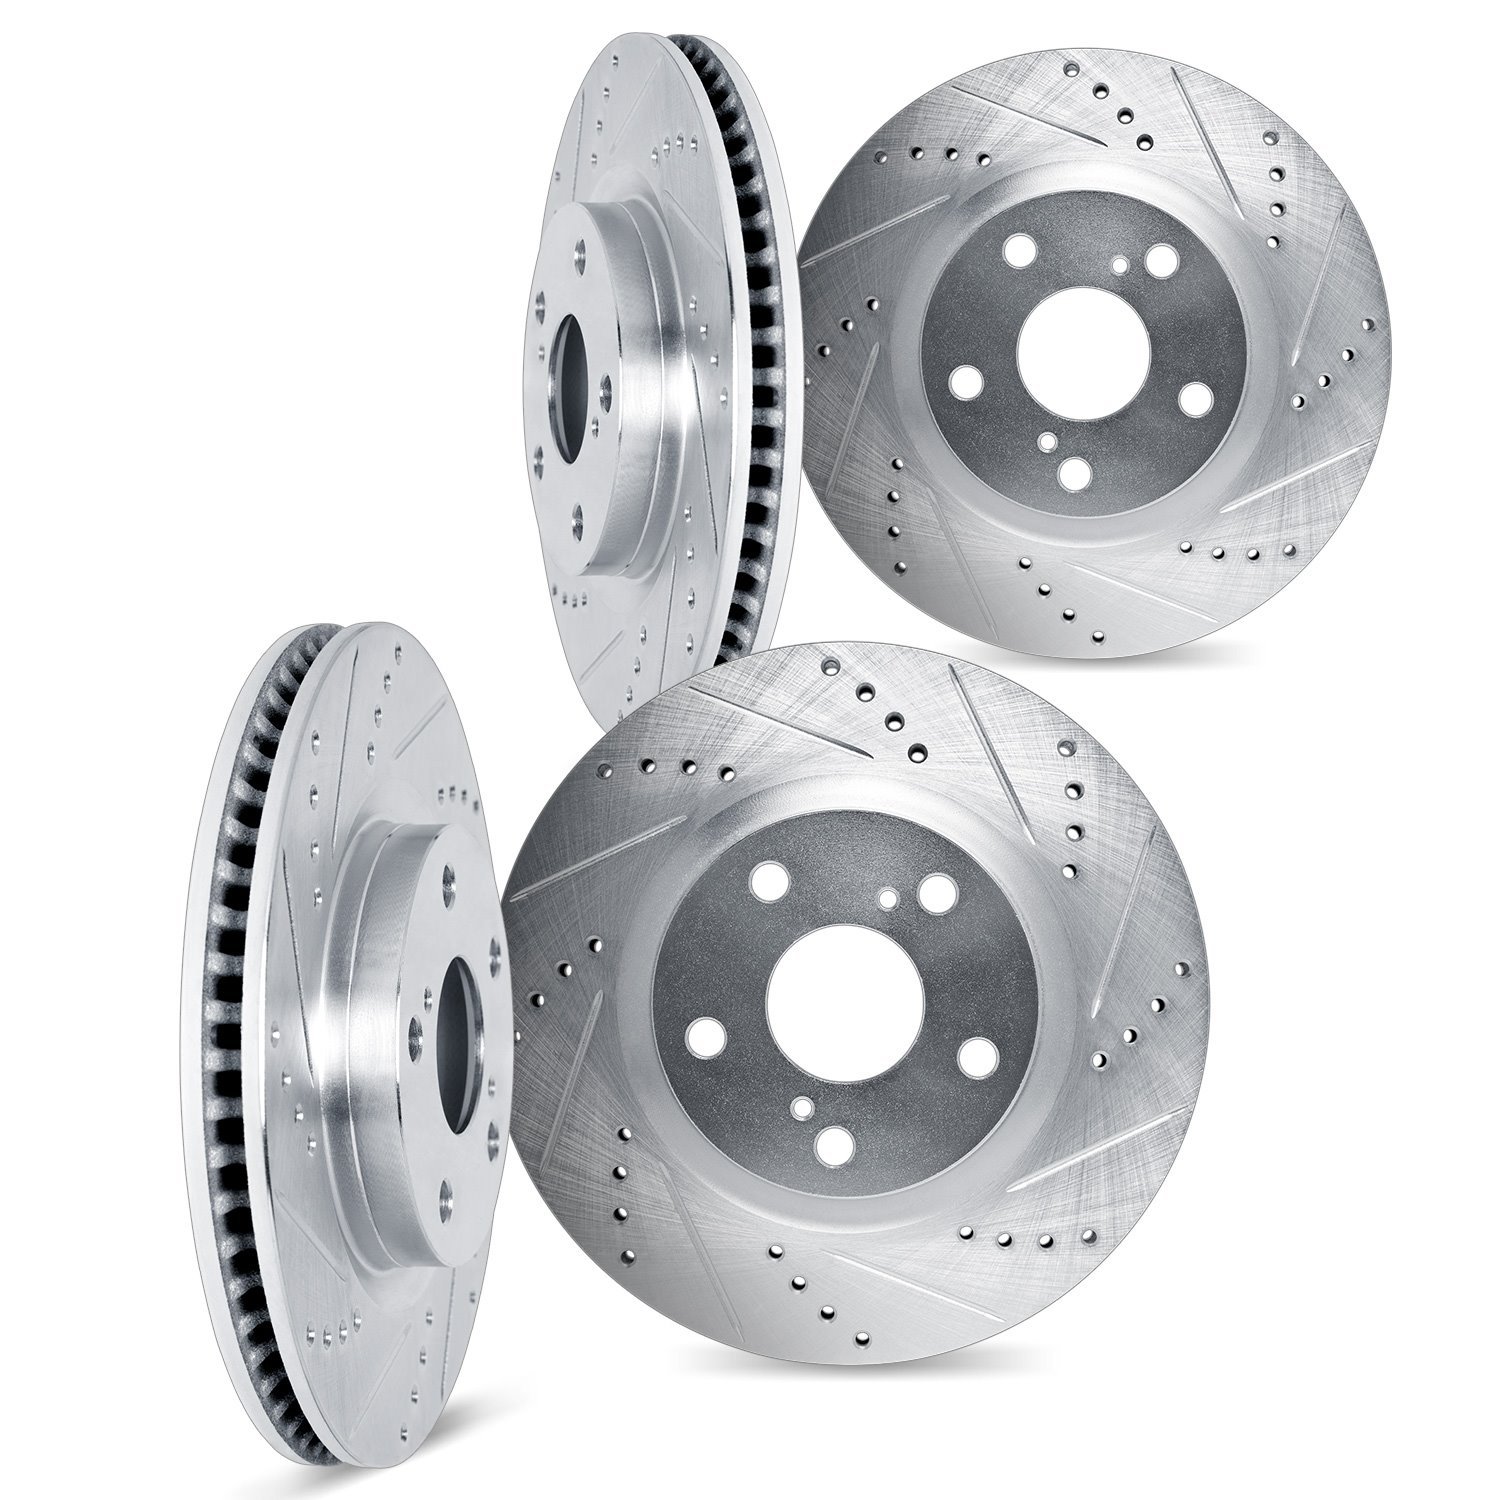 7004-76103 Drilled/Slotted Brake Rotors [Silver], Fits Select Lexus/Toyota/Scion, Position: Front and Rear